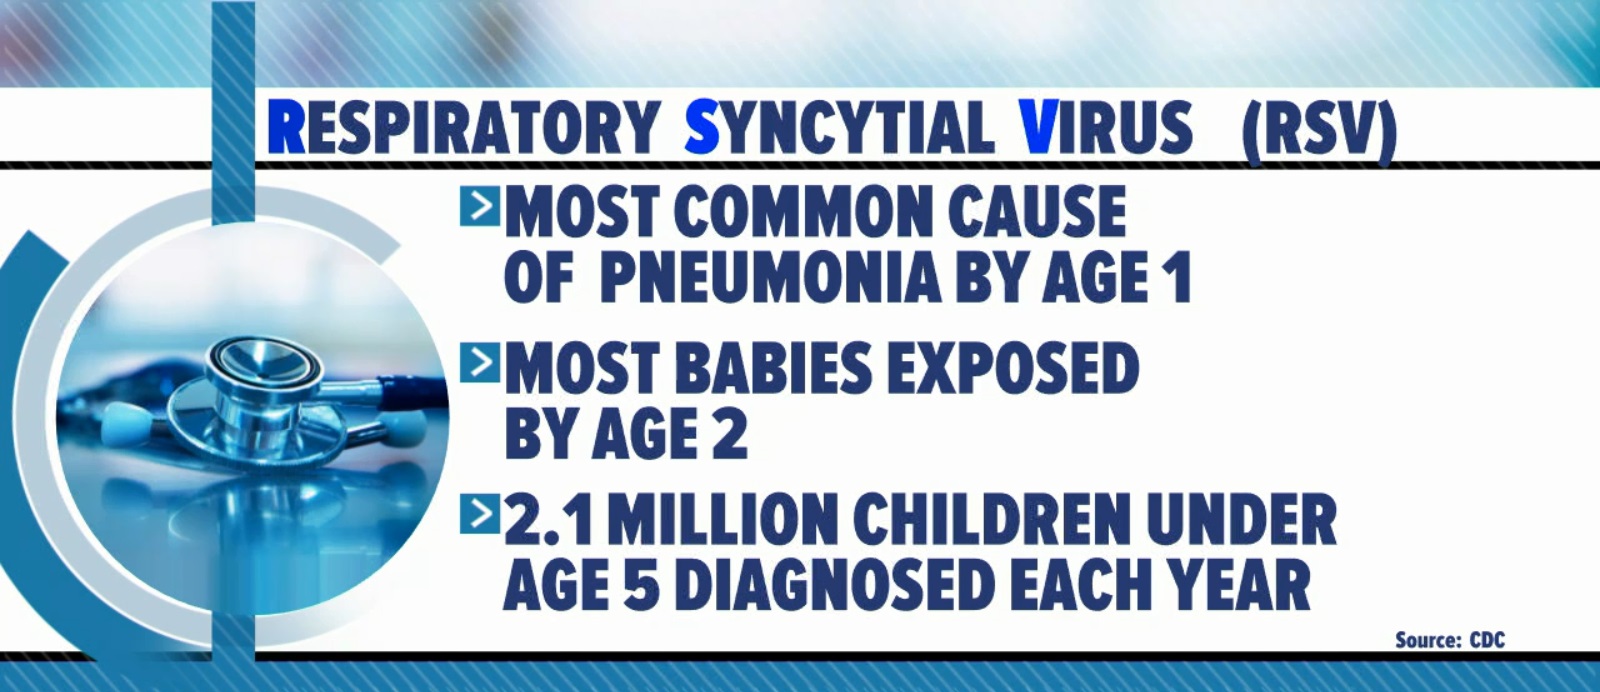 PHOTO: As germs spread in the cold weather season, health professionals are reminding parents of RSV -- the common respiratory virus that could be dangerous to young children.